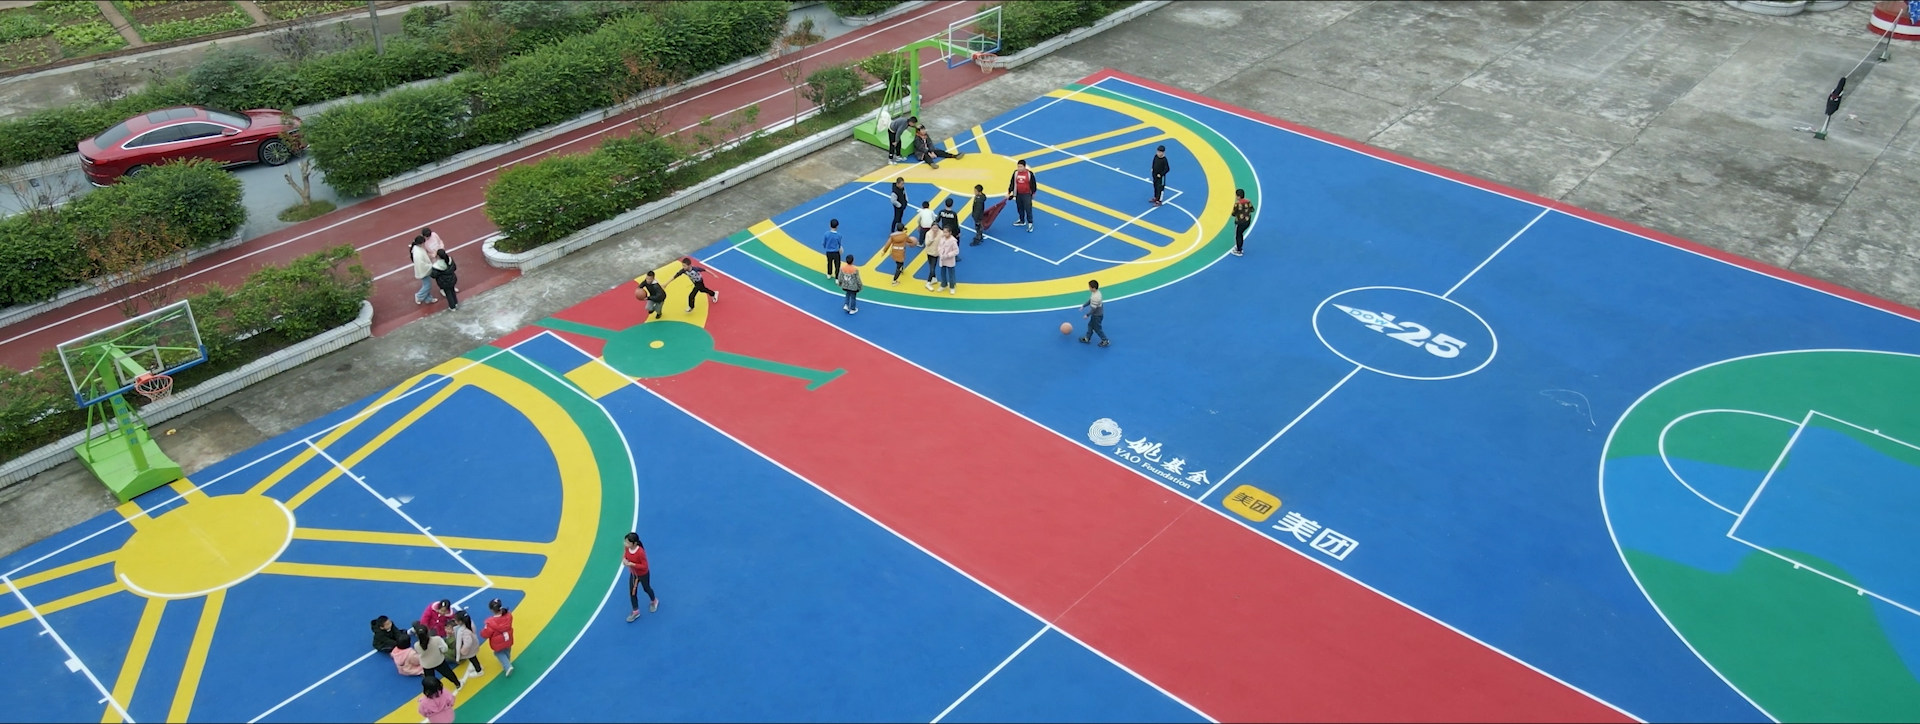 Children play on one of the colourful sport grounds built using upcycled old tyres in rural China. 